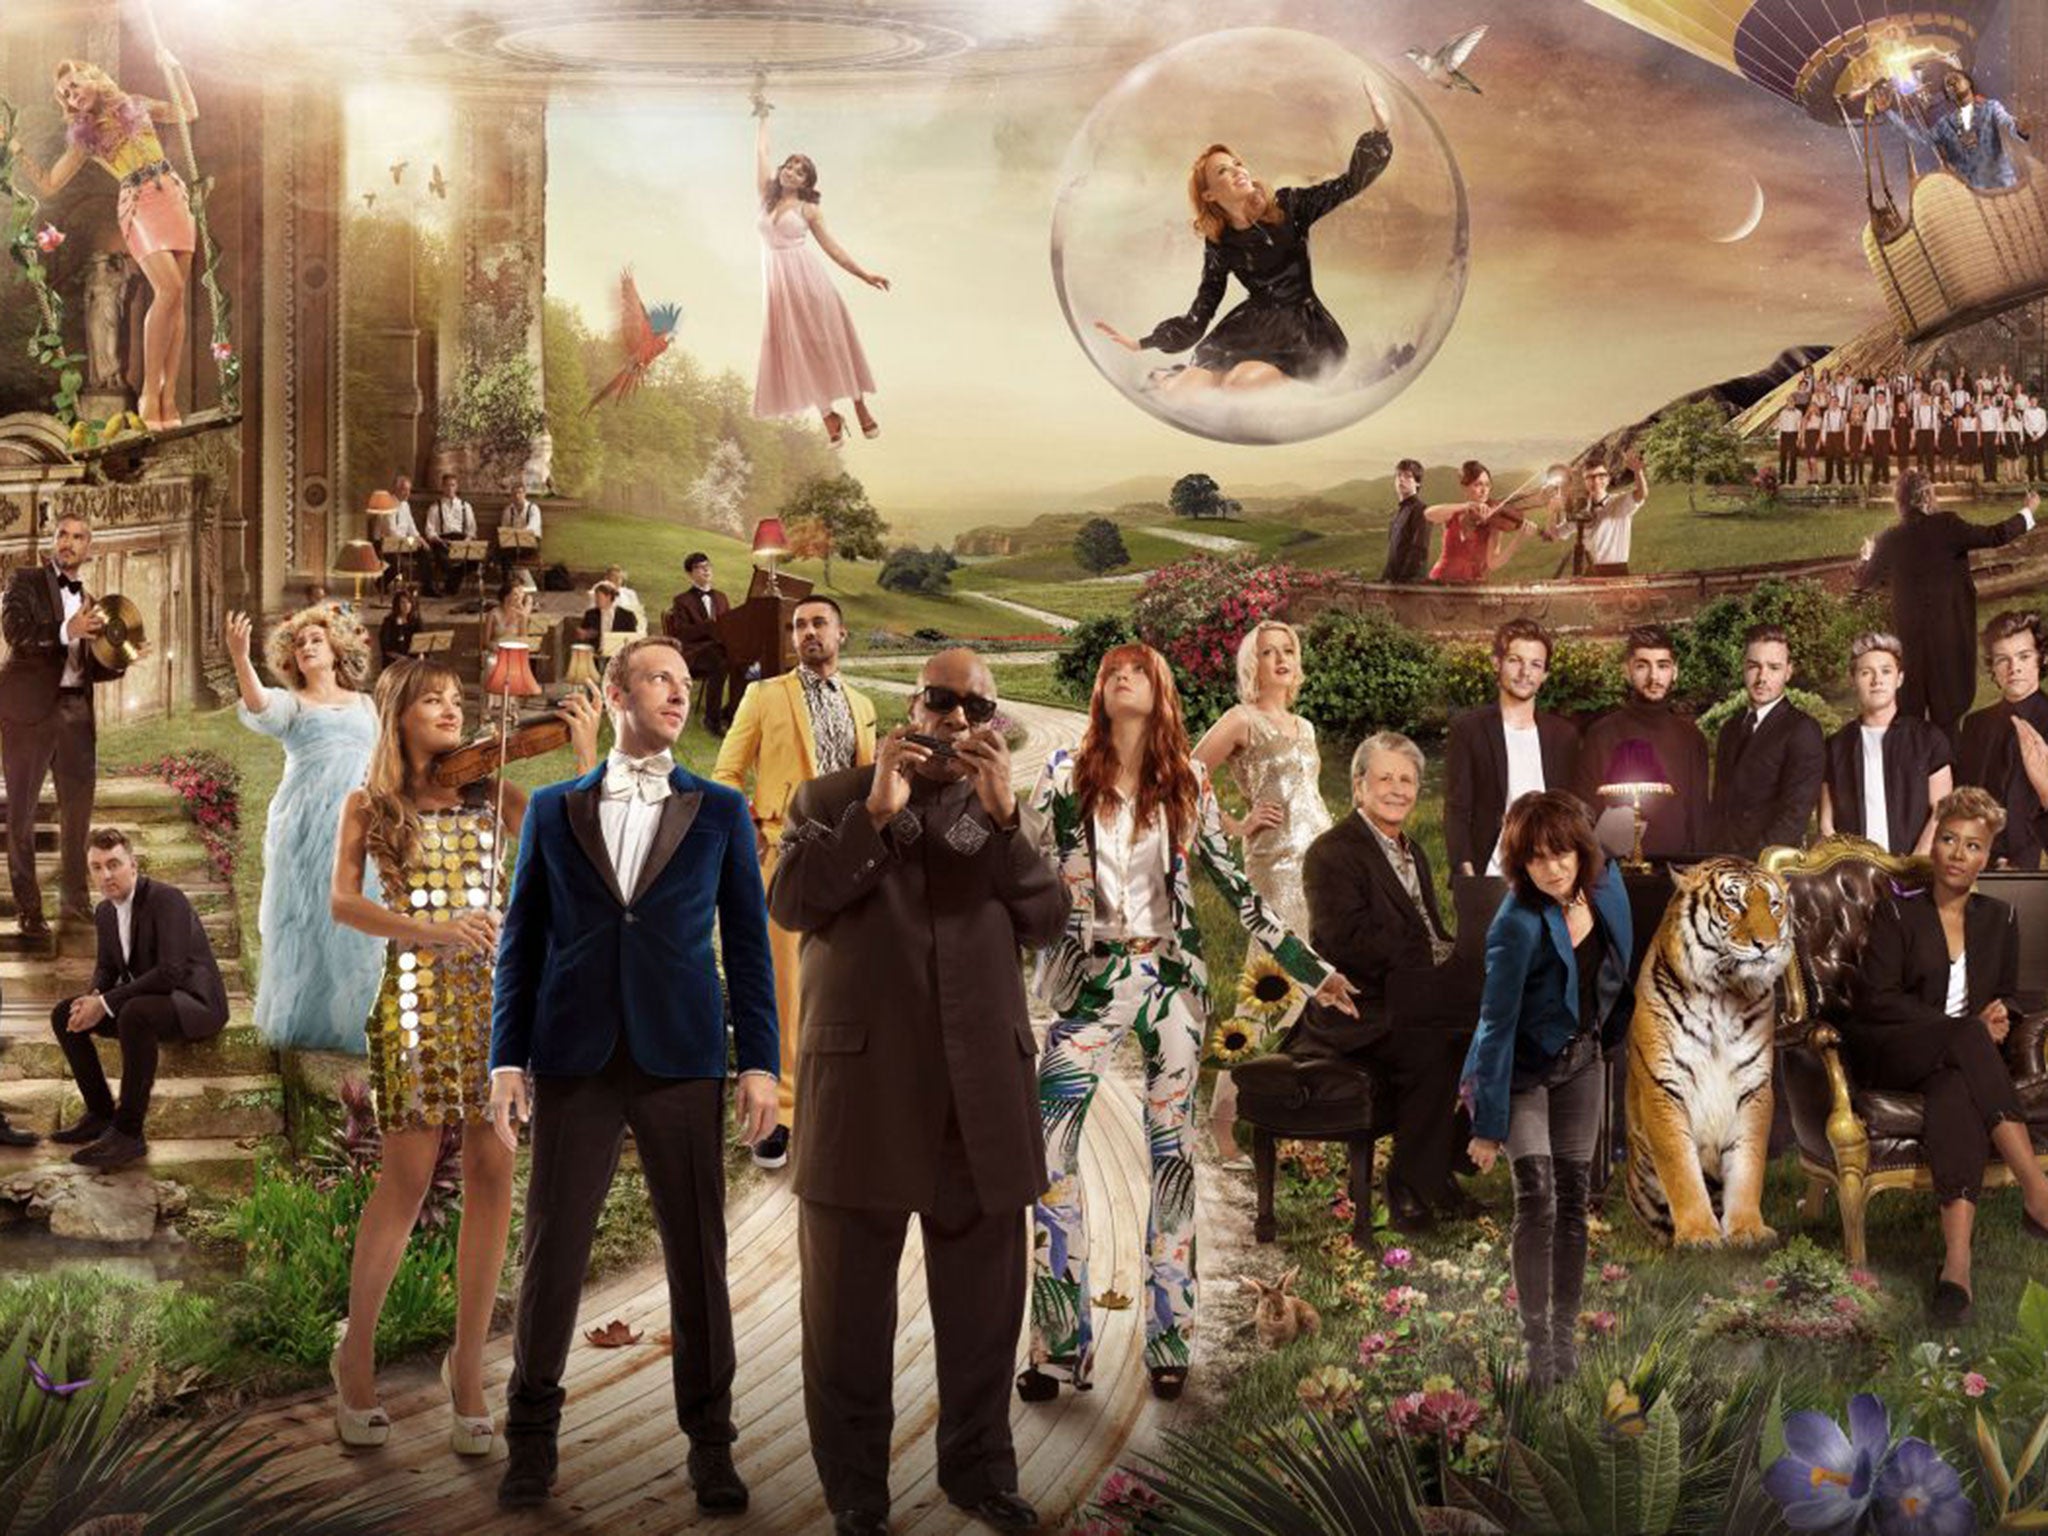 The BBC's all-star recording of 'God Only Knows' will feature the likes of Stevie Wonder, Paloma Faith, Gareth Malone, Jools Holland and One Direction